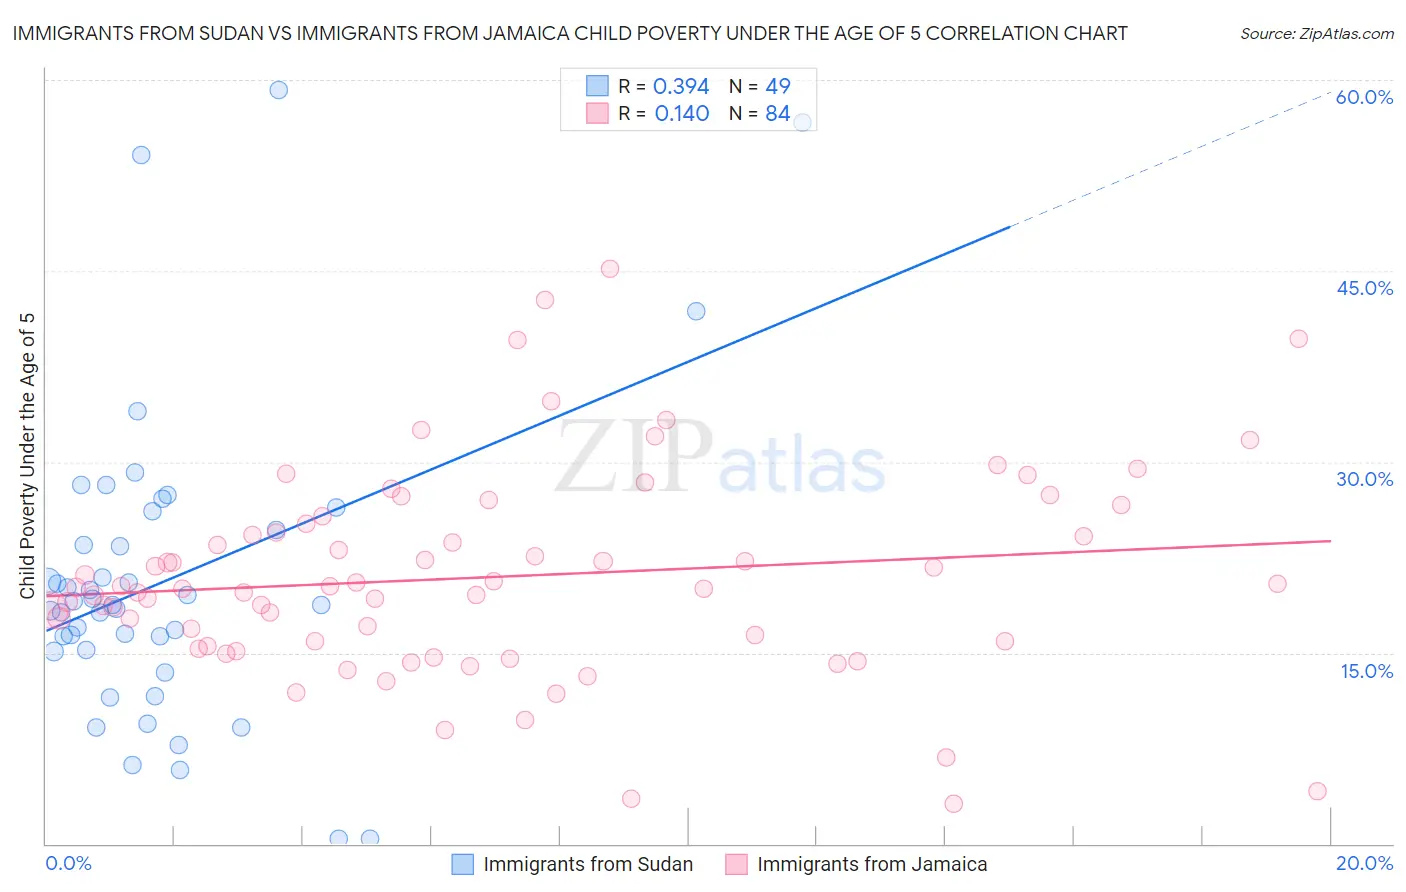 Immigrants from Sudan vs Immigrants from Jamaica Child Poverty Under the Age of 5